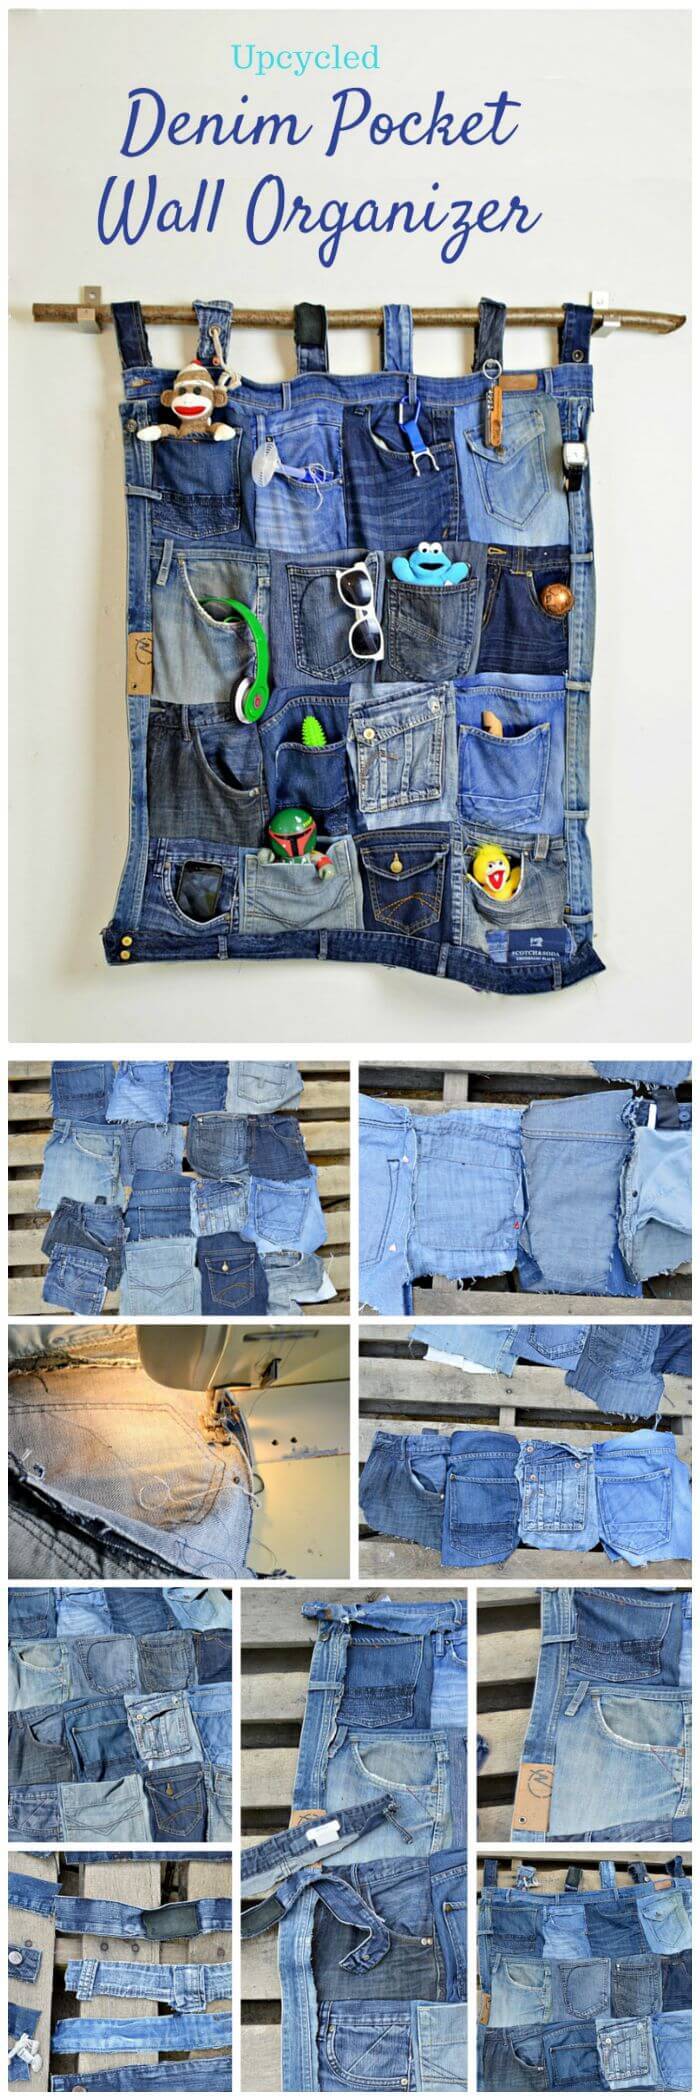 DIY Upcycle Old Jeans Into A Great Denim Pocket Organiser